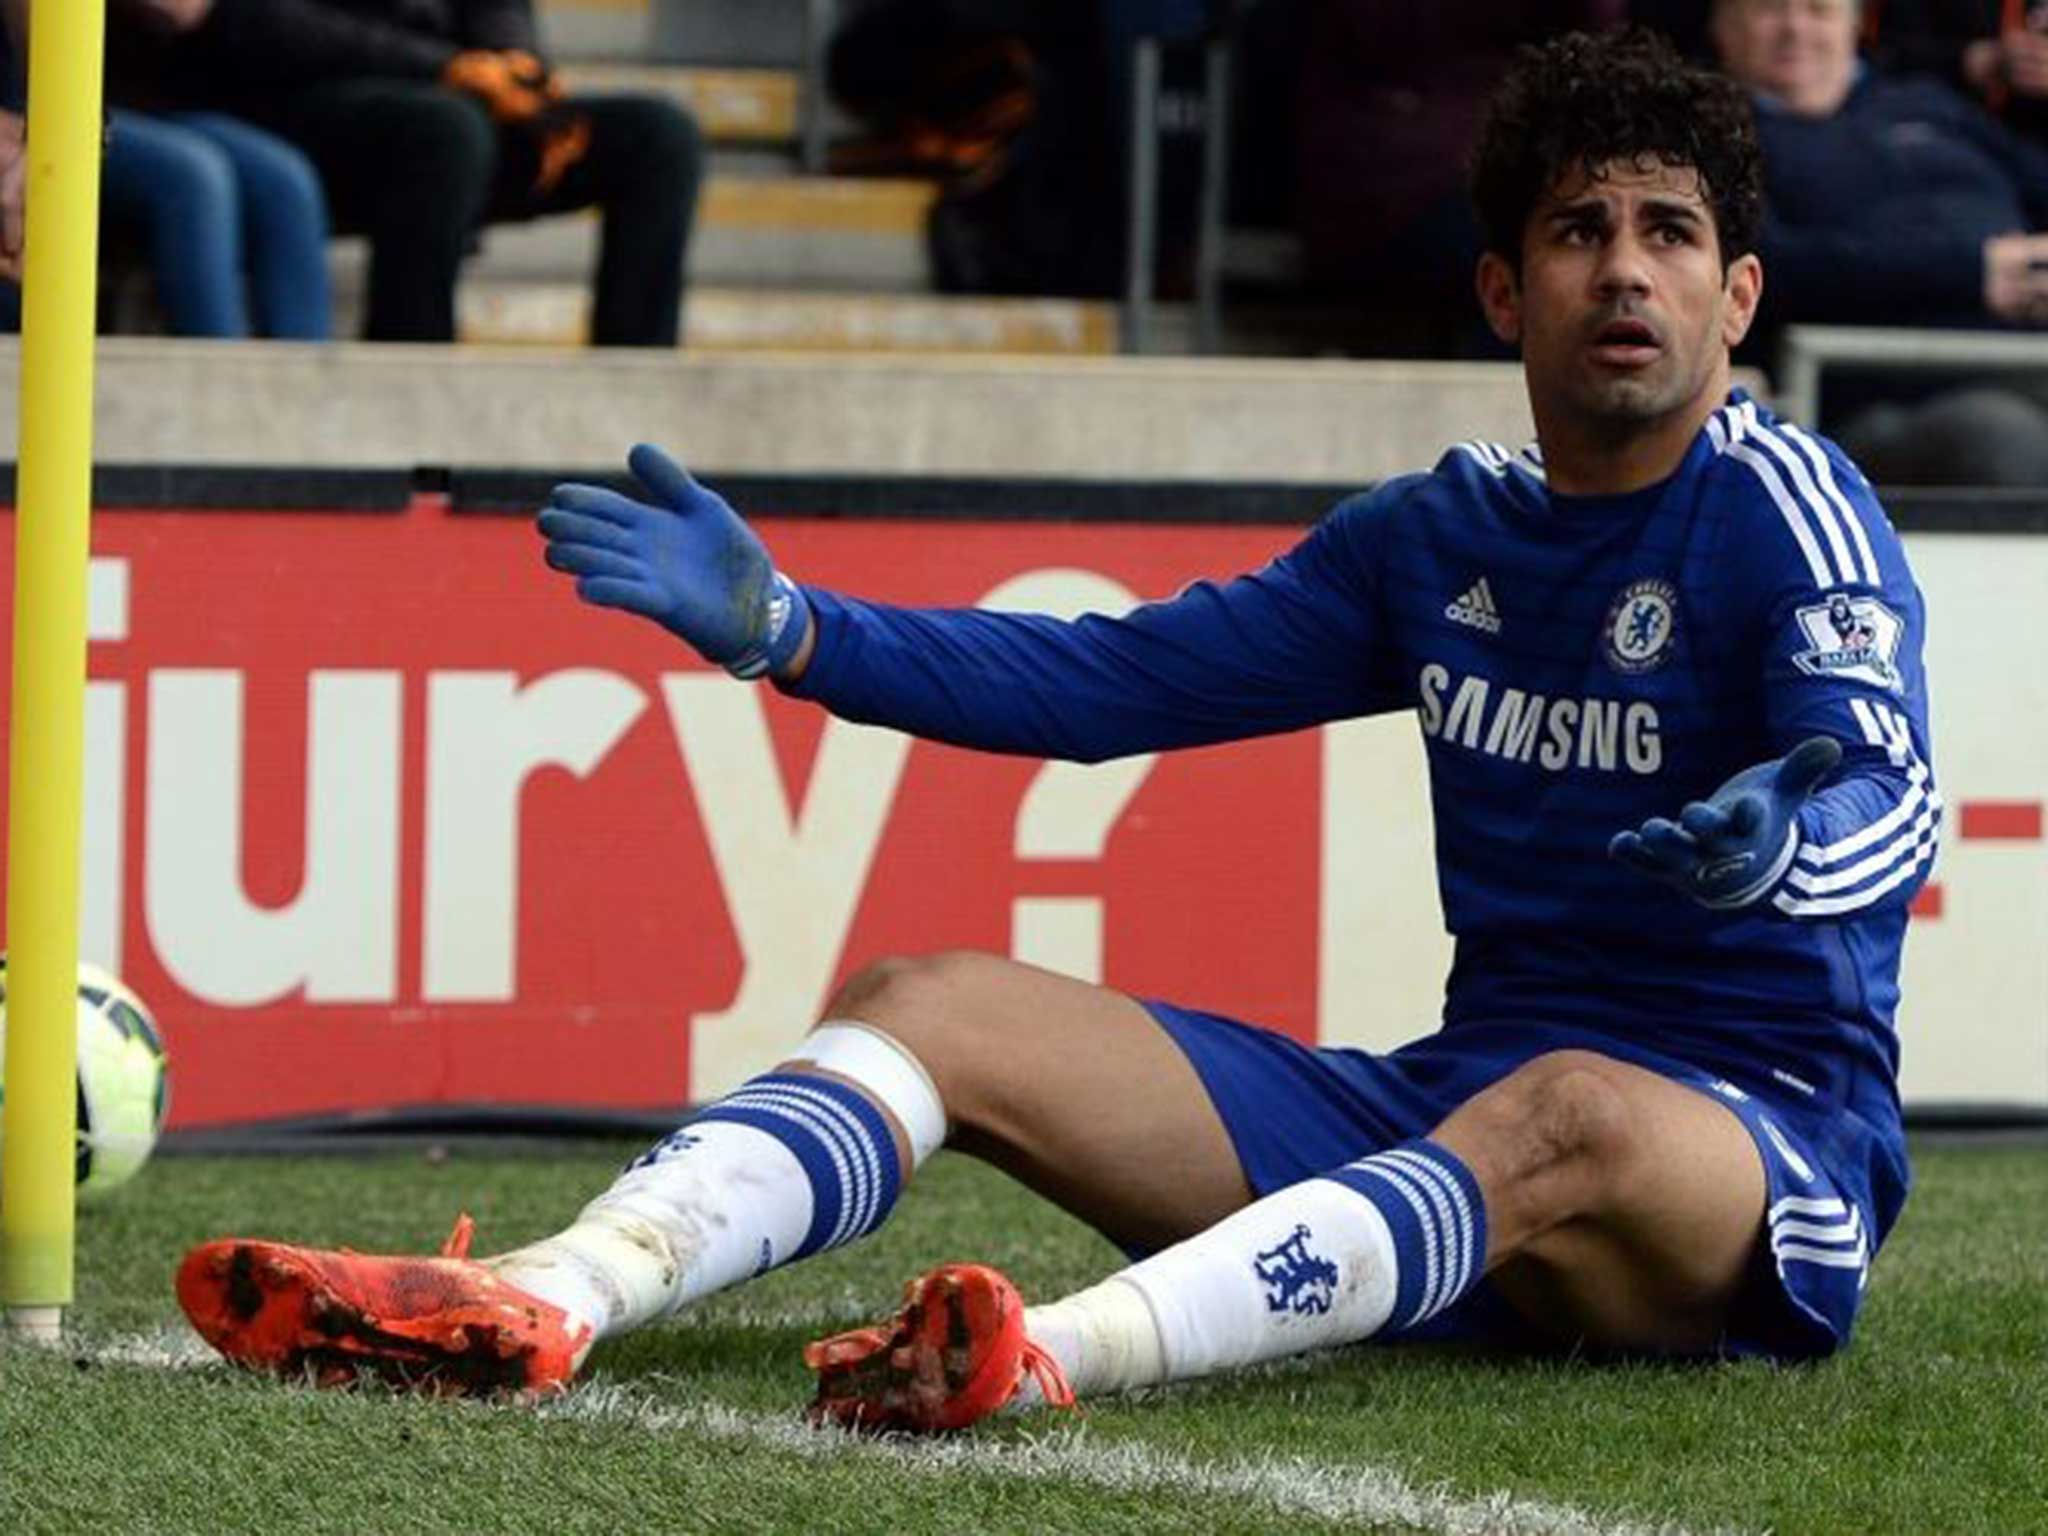 Chelsea striker Diego Costa’s hamstring injury will keep him on the sidelines until early next month